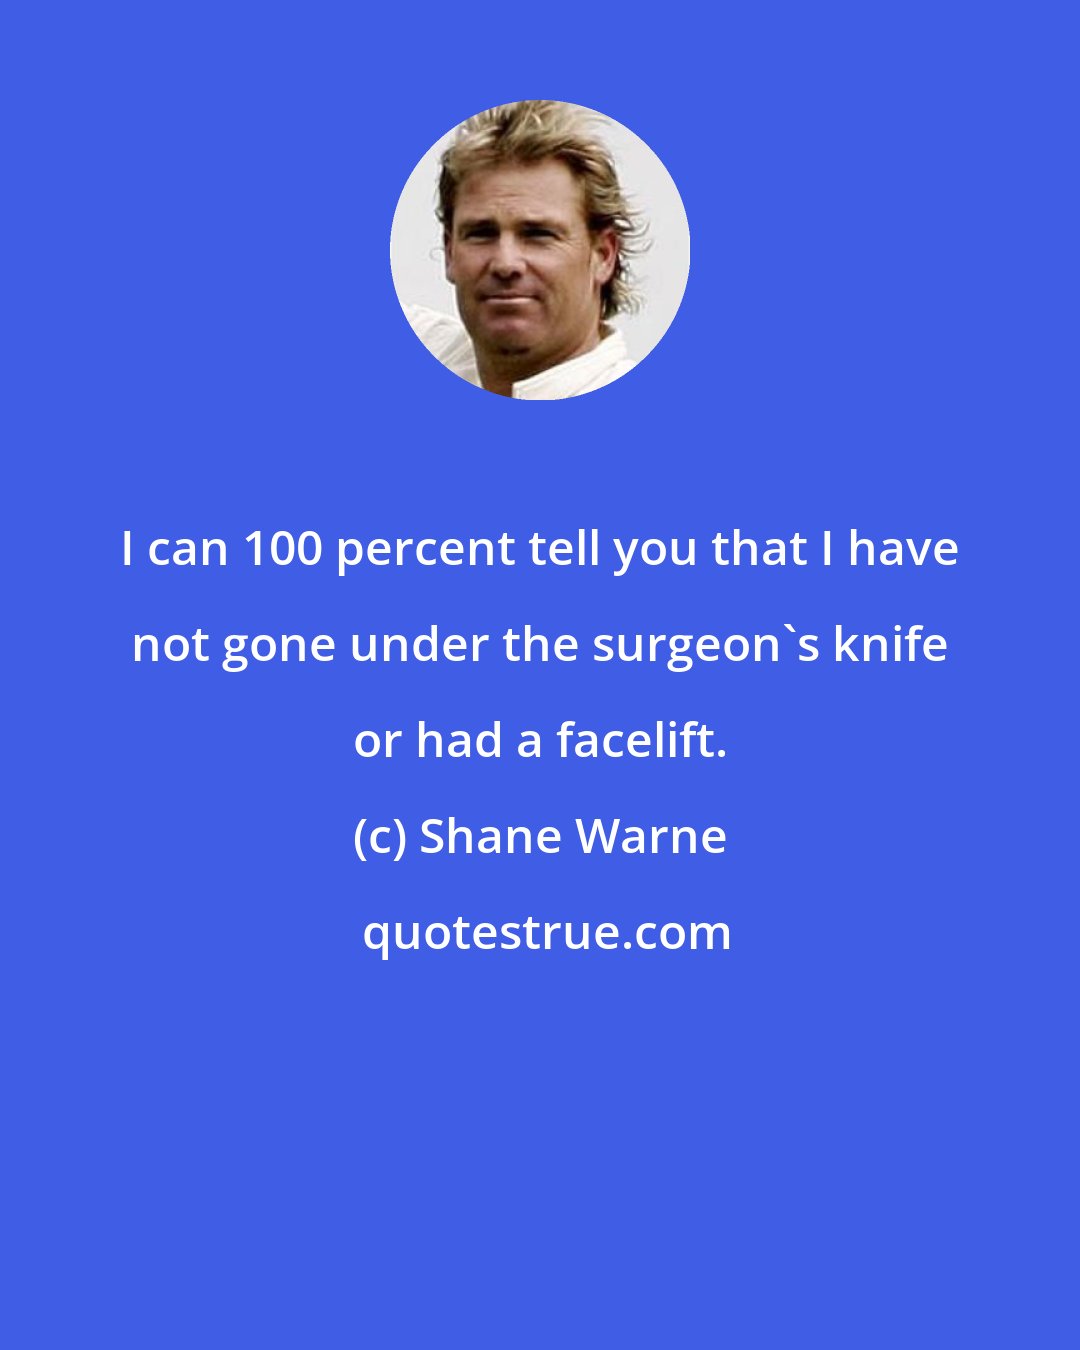 Shane Warne: I can 100 percent tell you that I have not gone under the surgeon's knife or had a facelift.